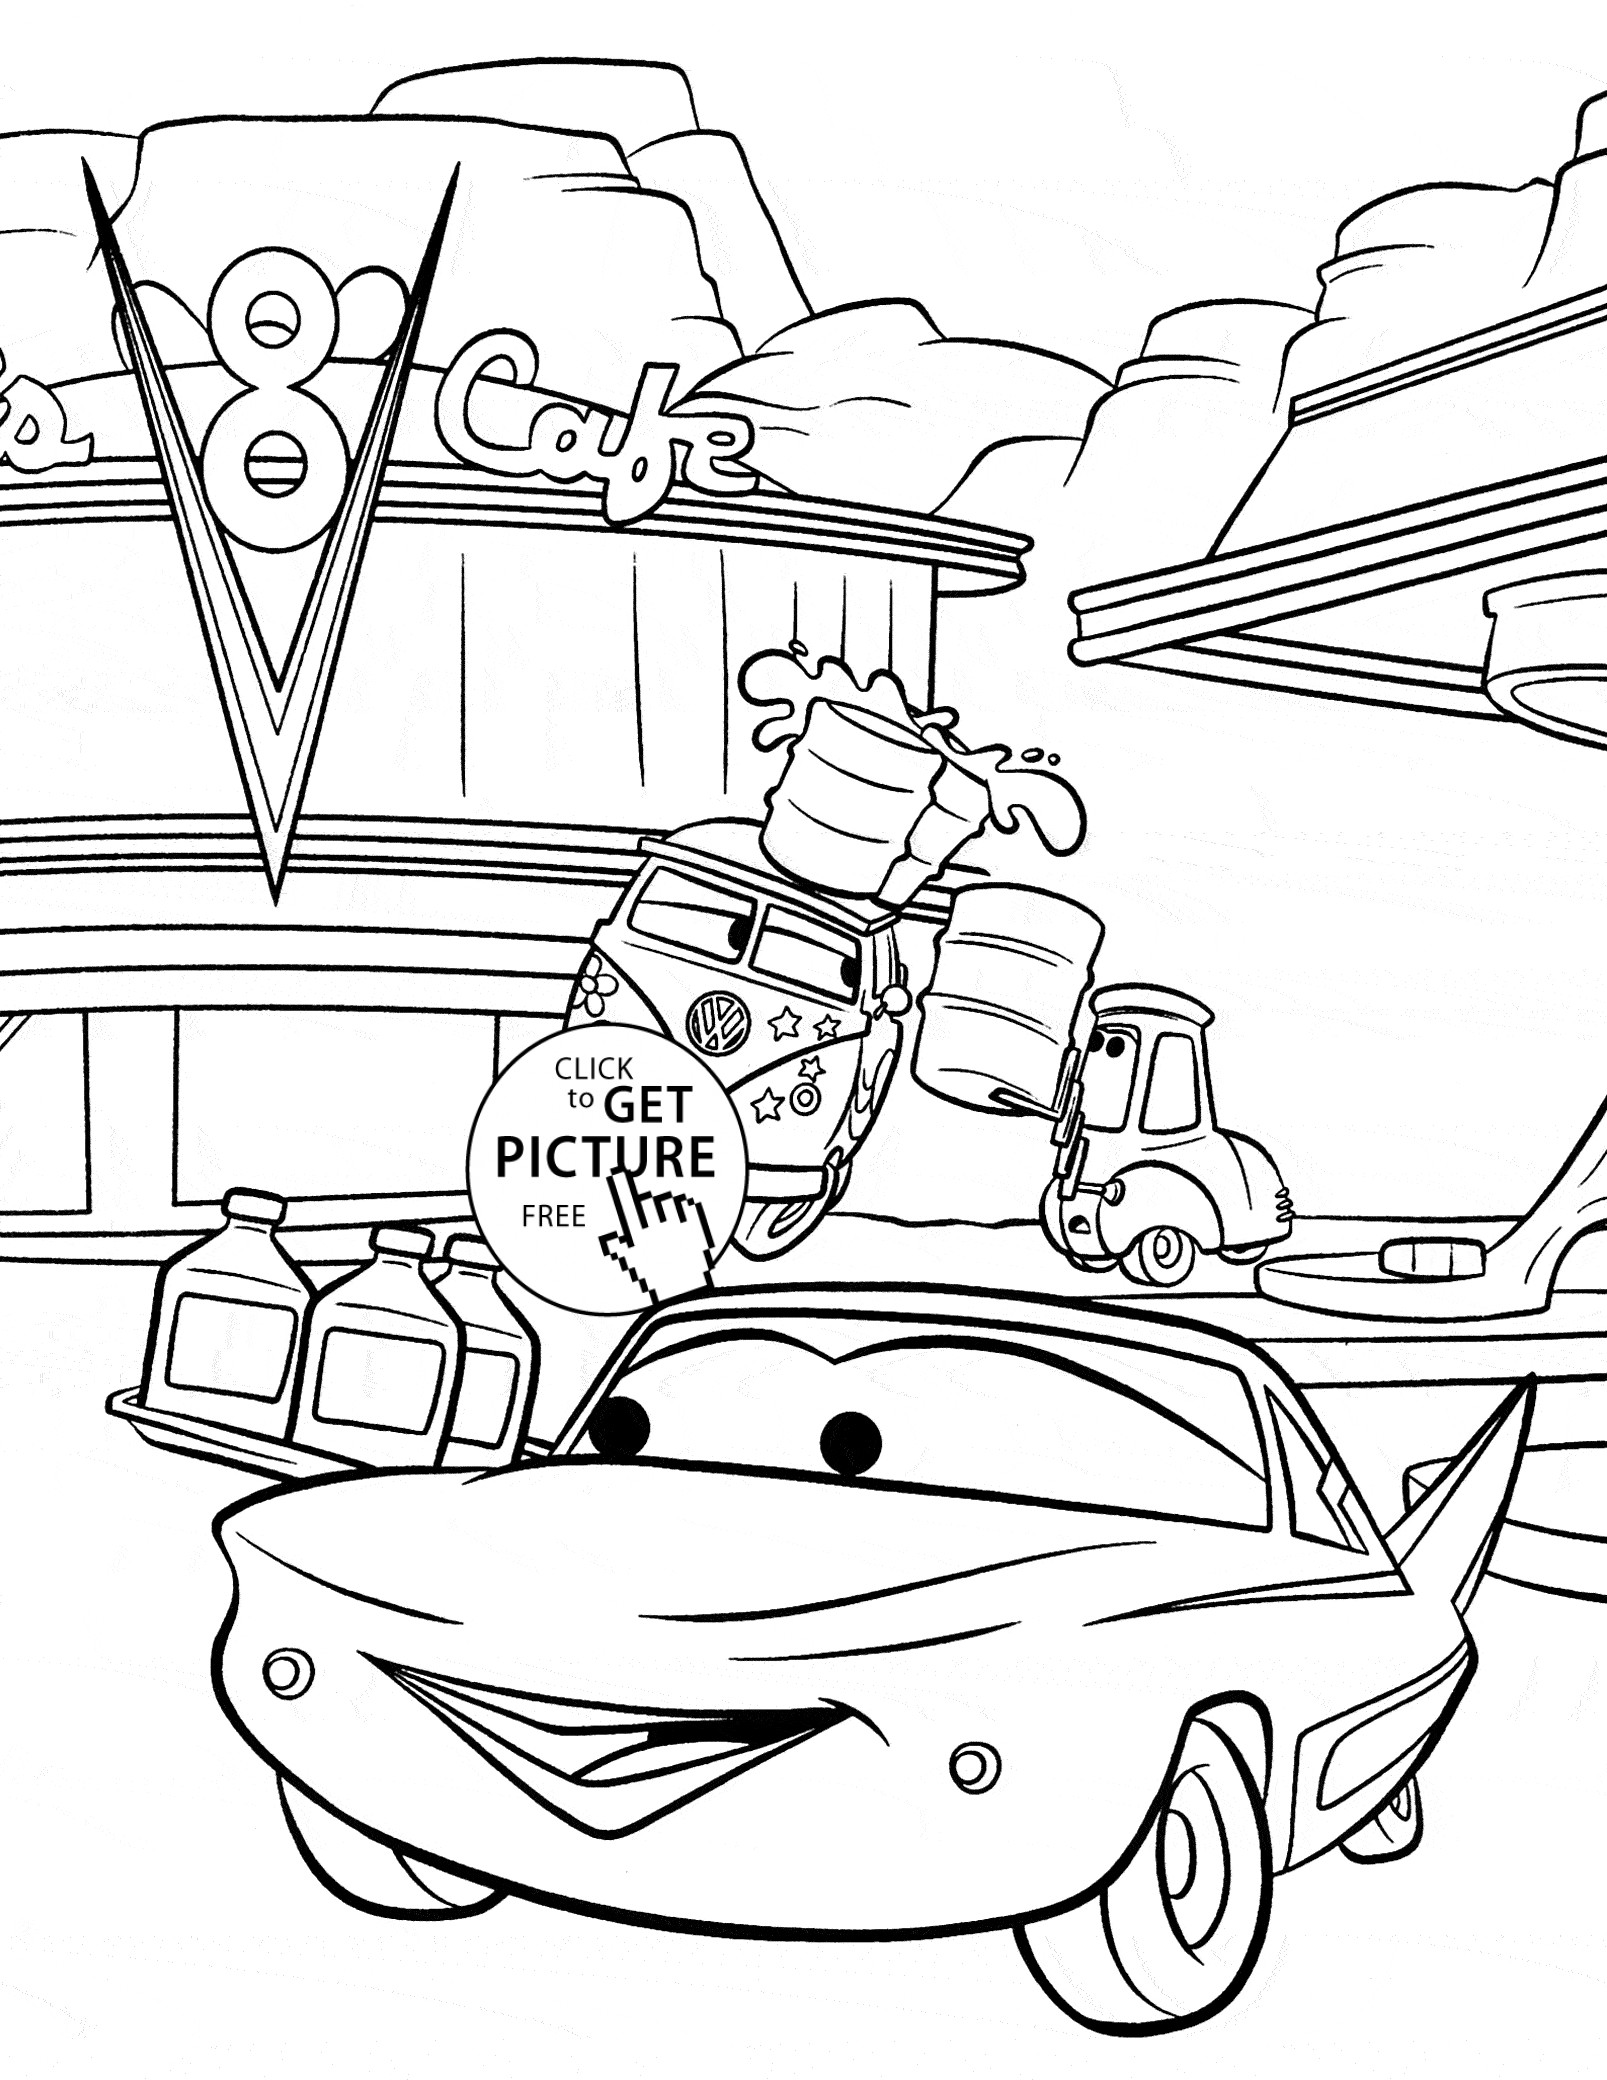 Disney Coloring Pages For Boys
 Cars cafe 8 coloring page for kids disney coloring pages